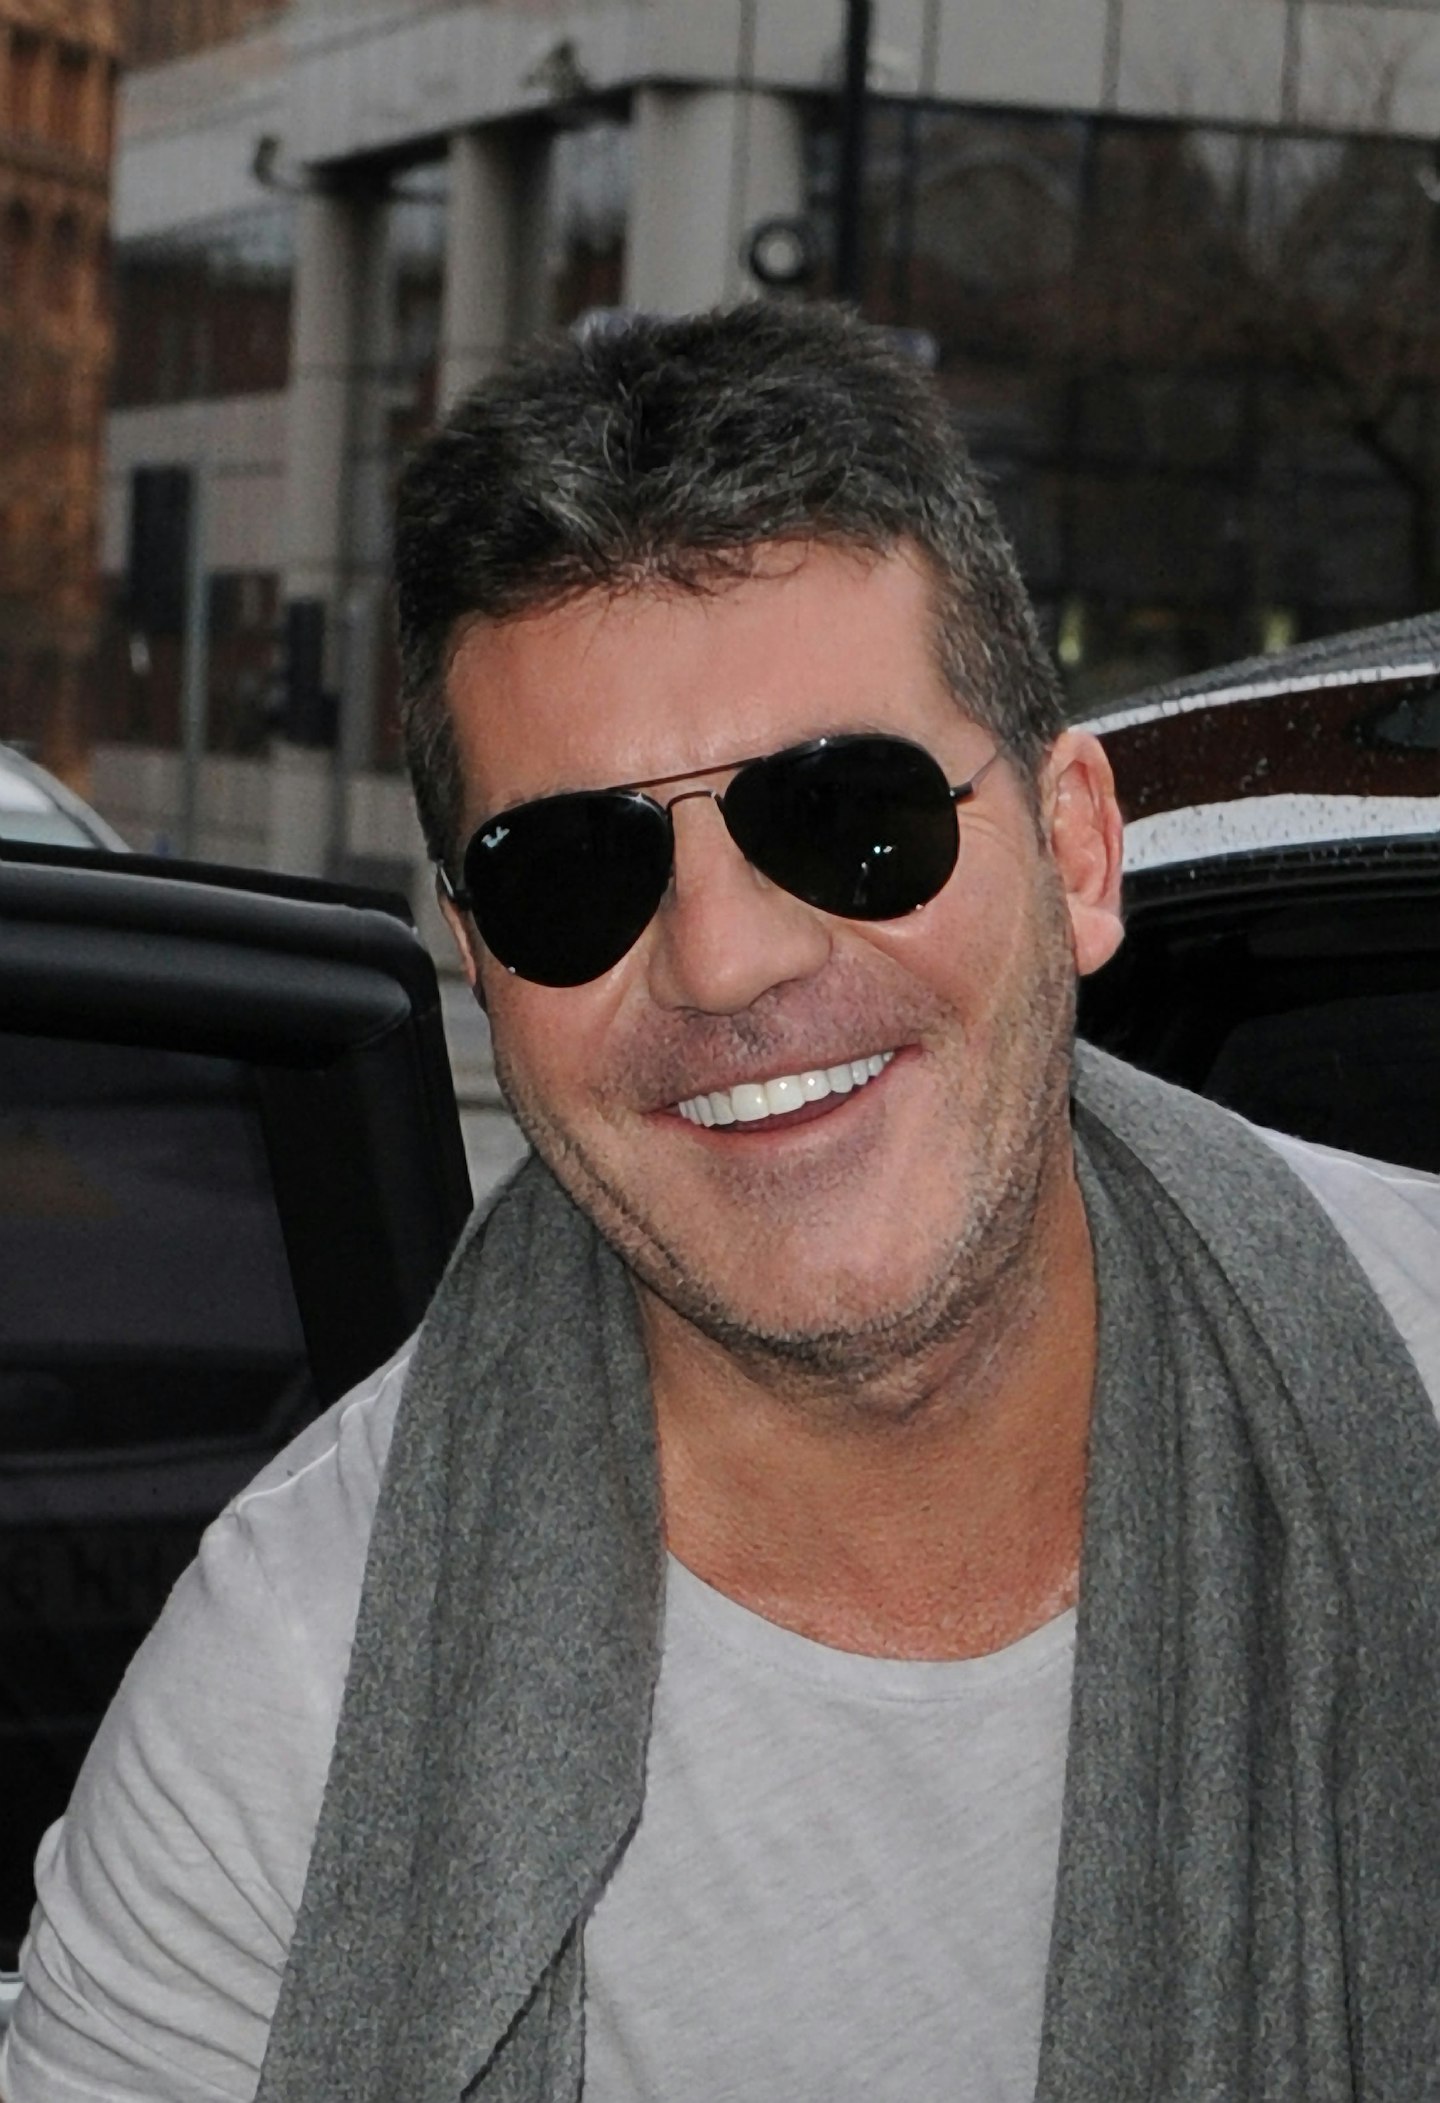 simon-cowell-laughing-sunglasses-scarf-jumper